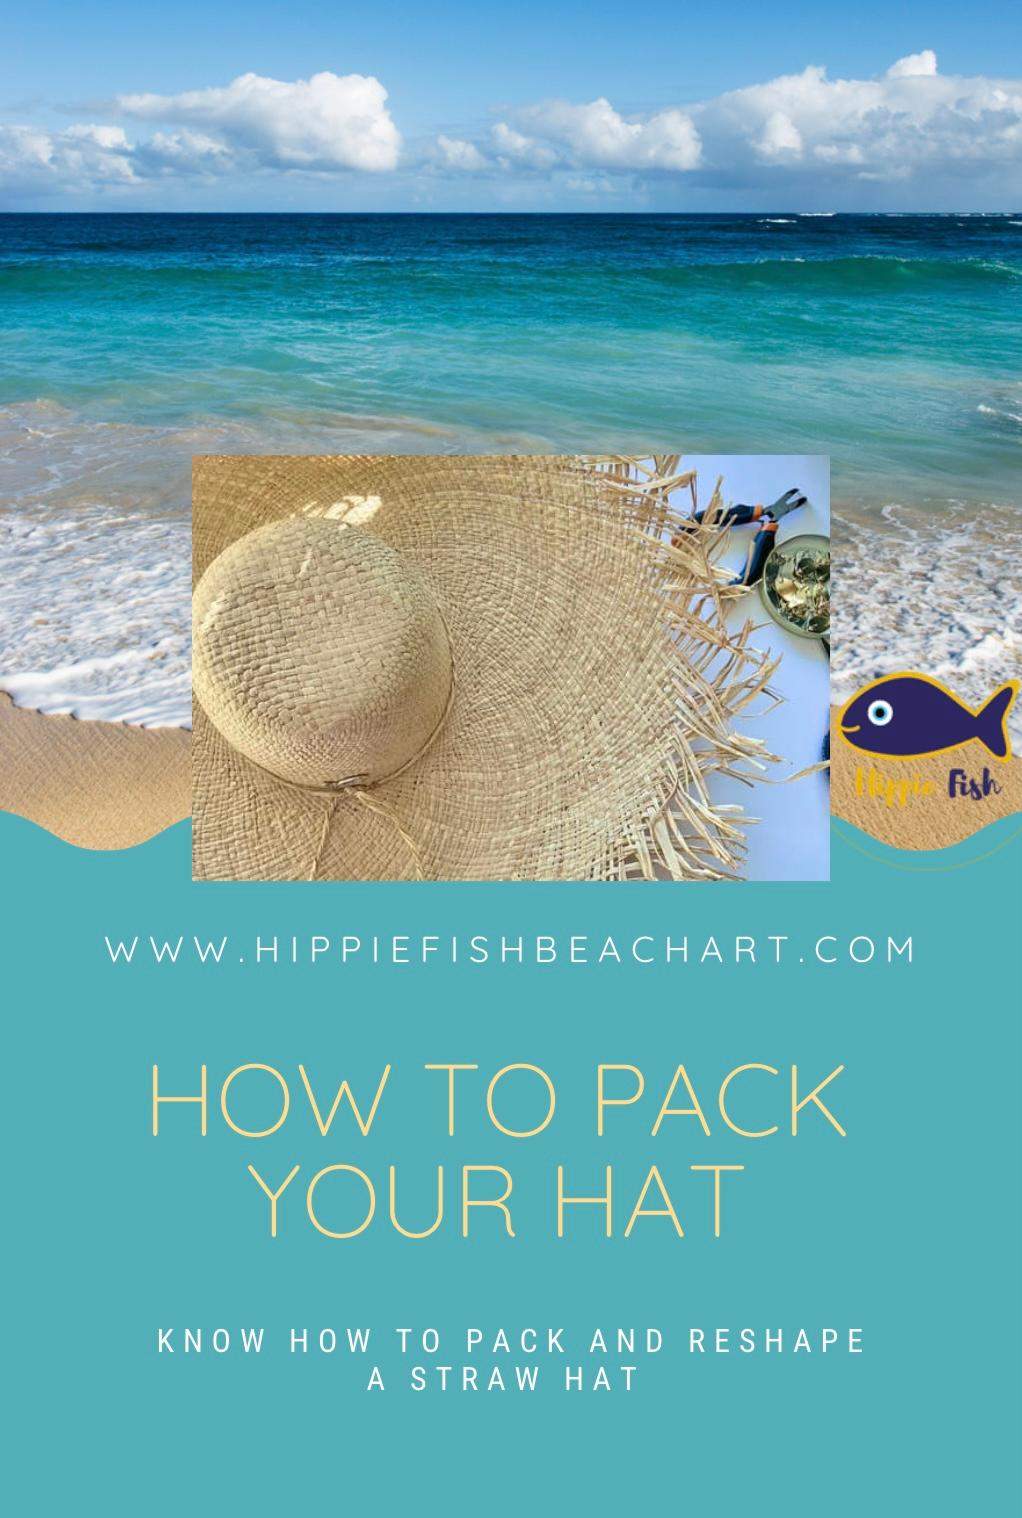 How to pack a straw hat